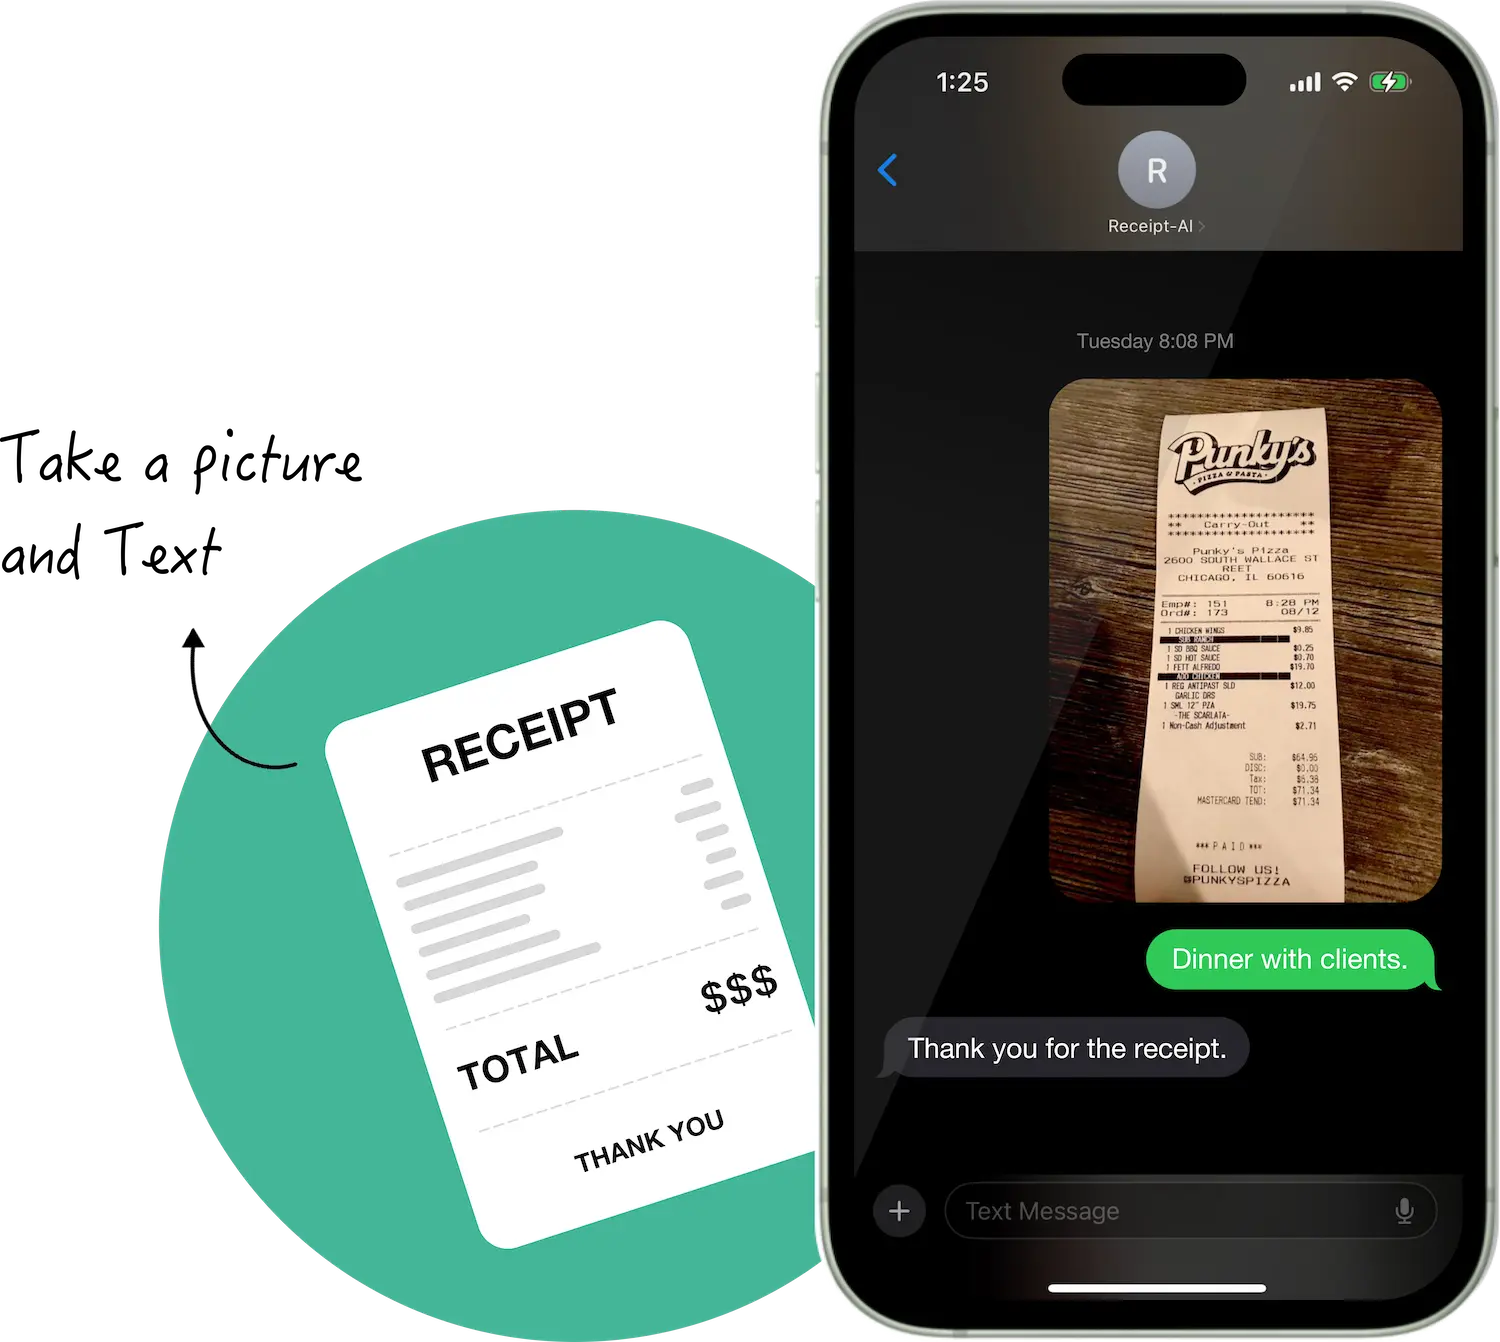 Receipt-AI: Take a picture and Text